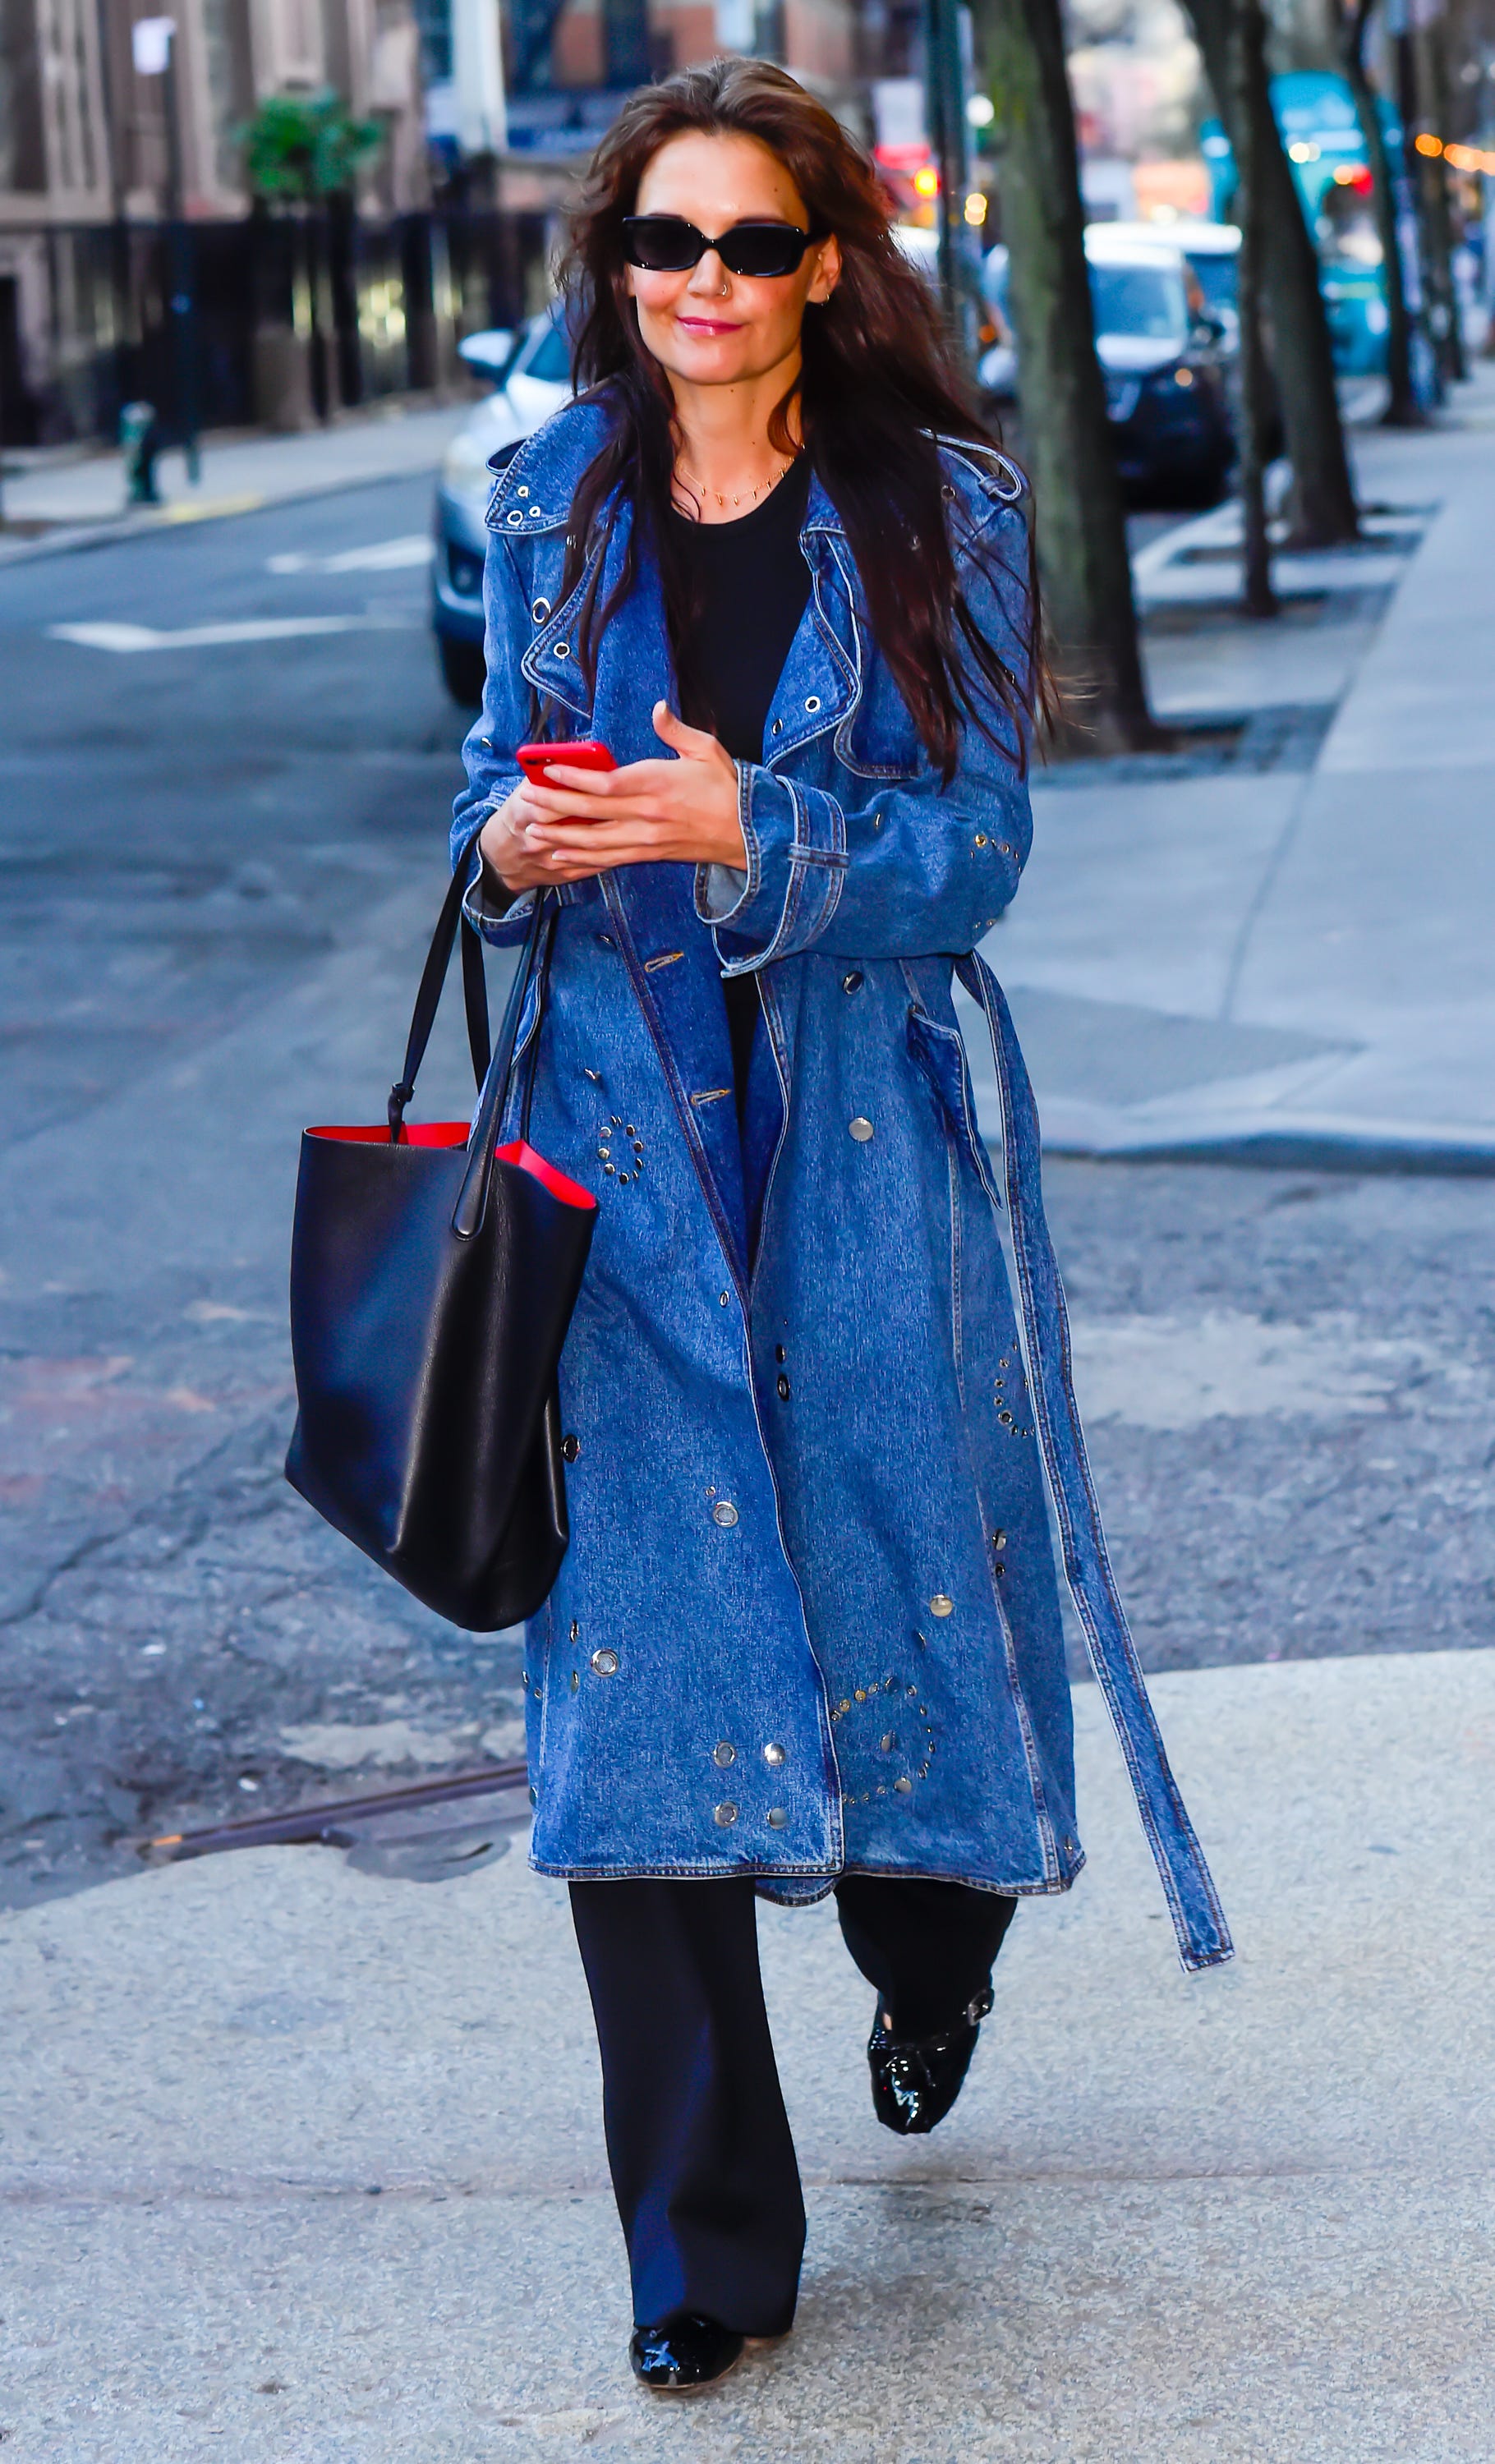 Katie Holmes's Studded Denim Trench Coat Is Why This Outfit Works